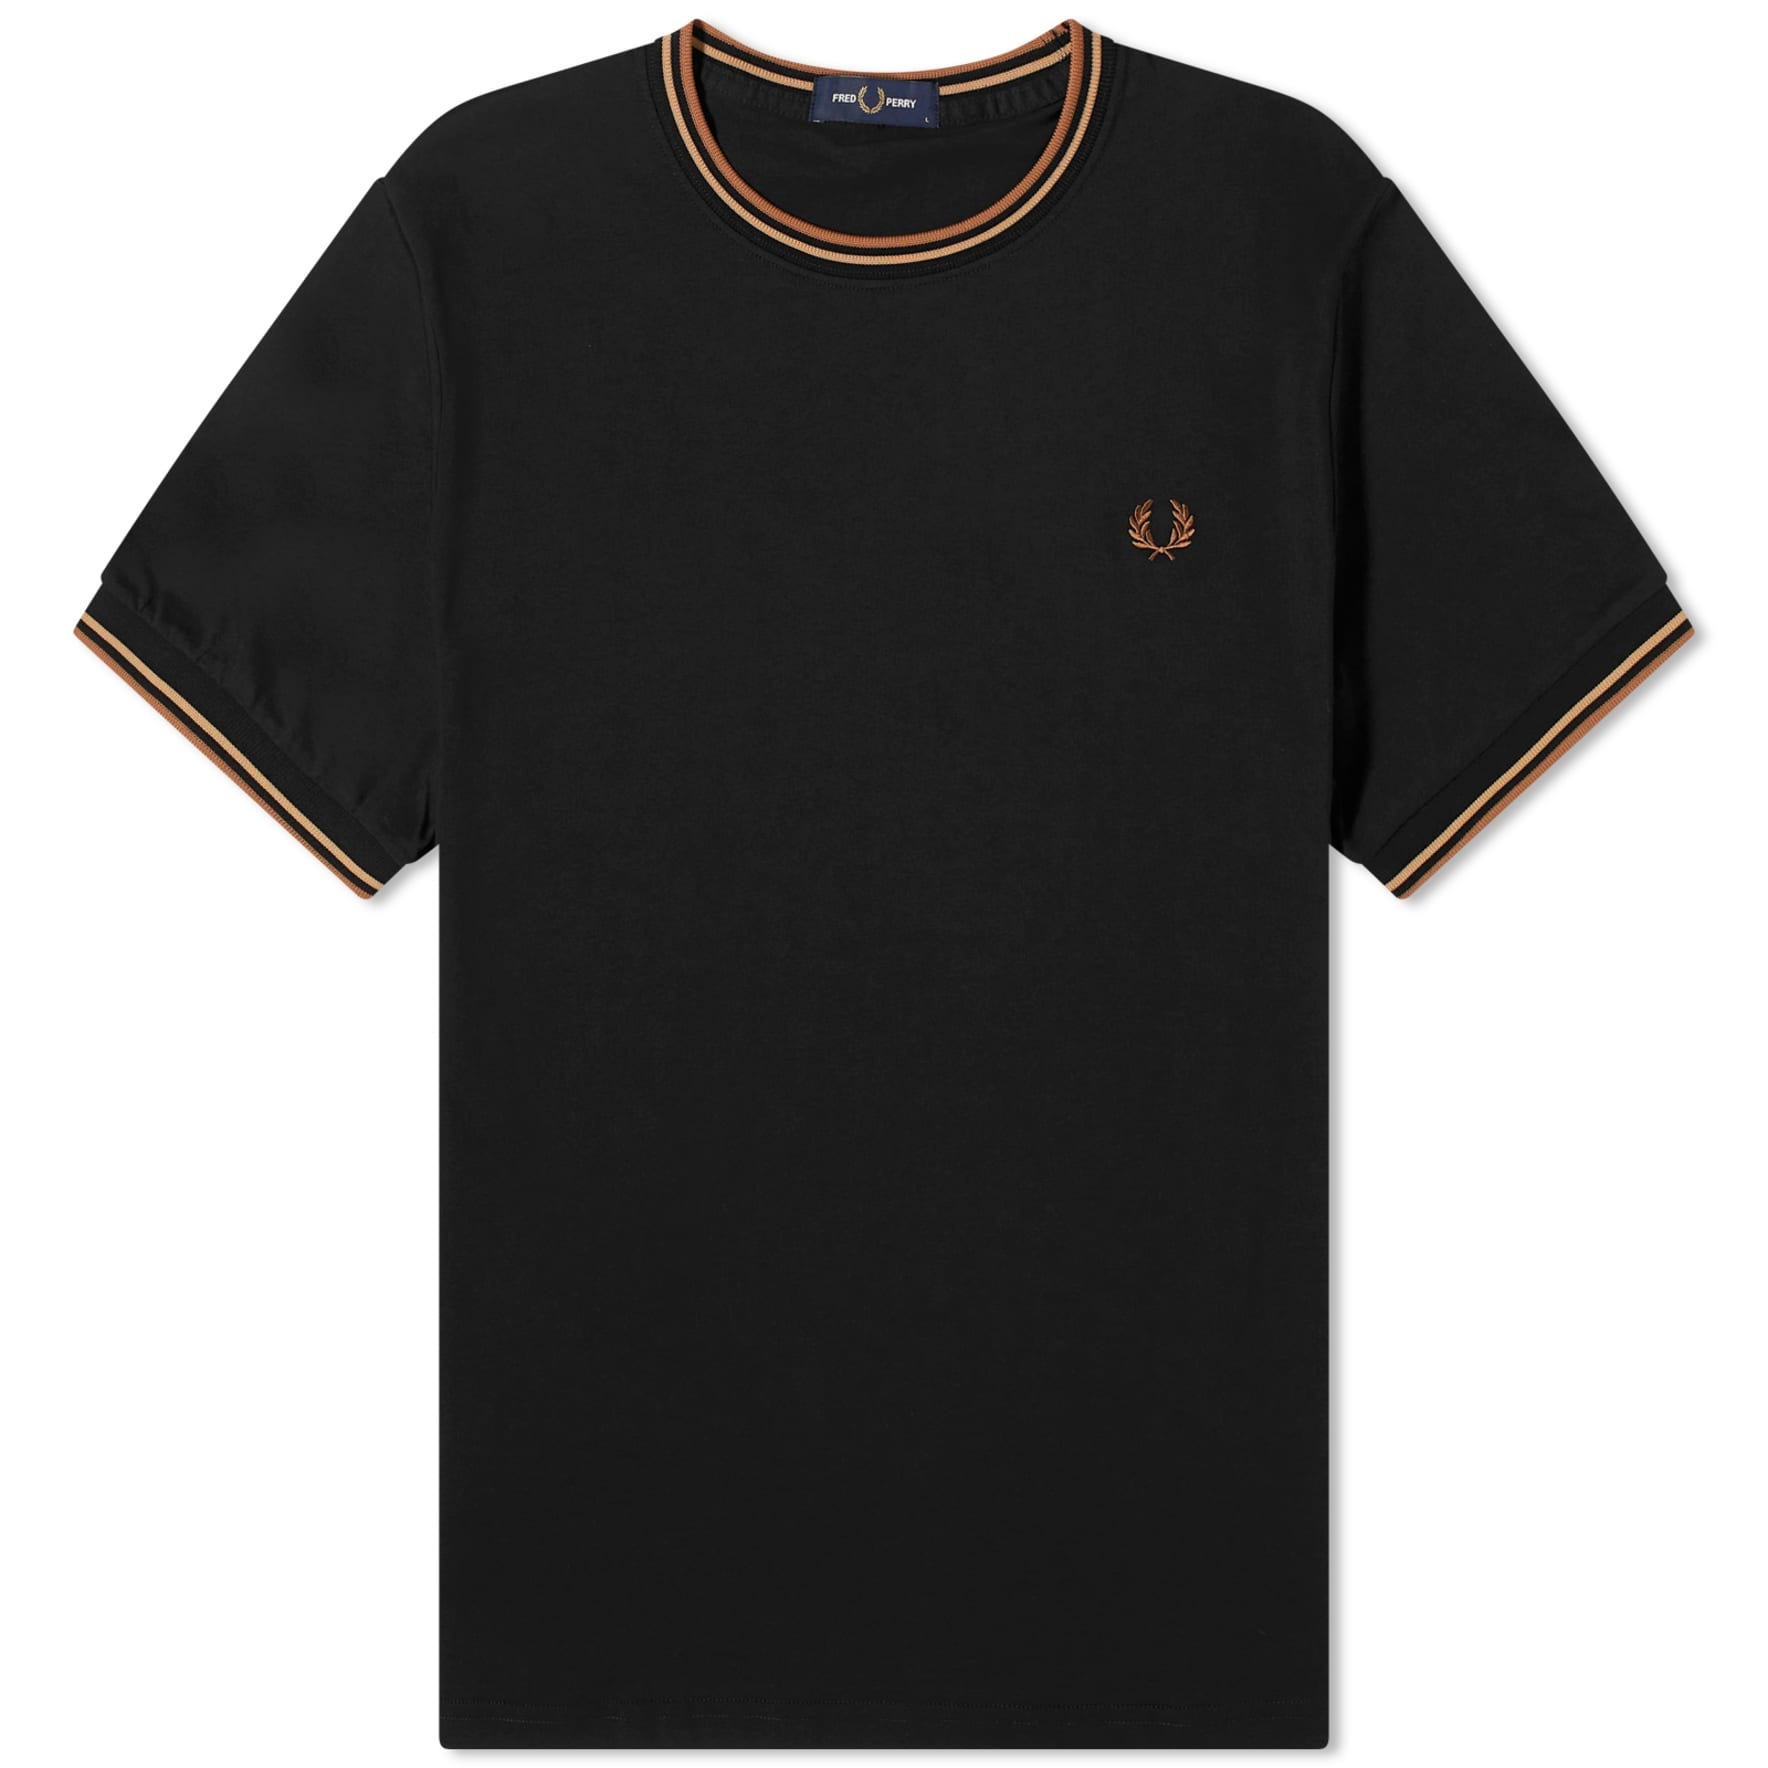 Футболка Fred Perry Twin Tipped, черный футболка fred perry long sleeve twin tipped tee